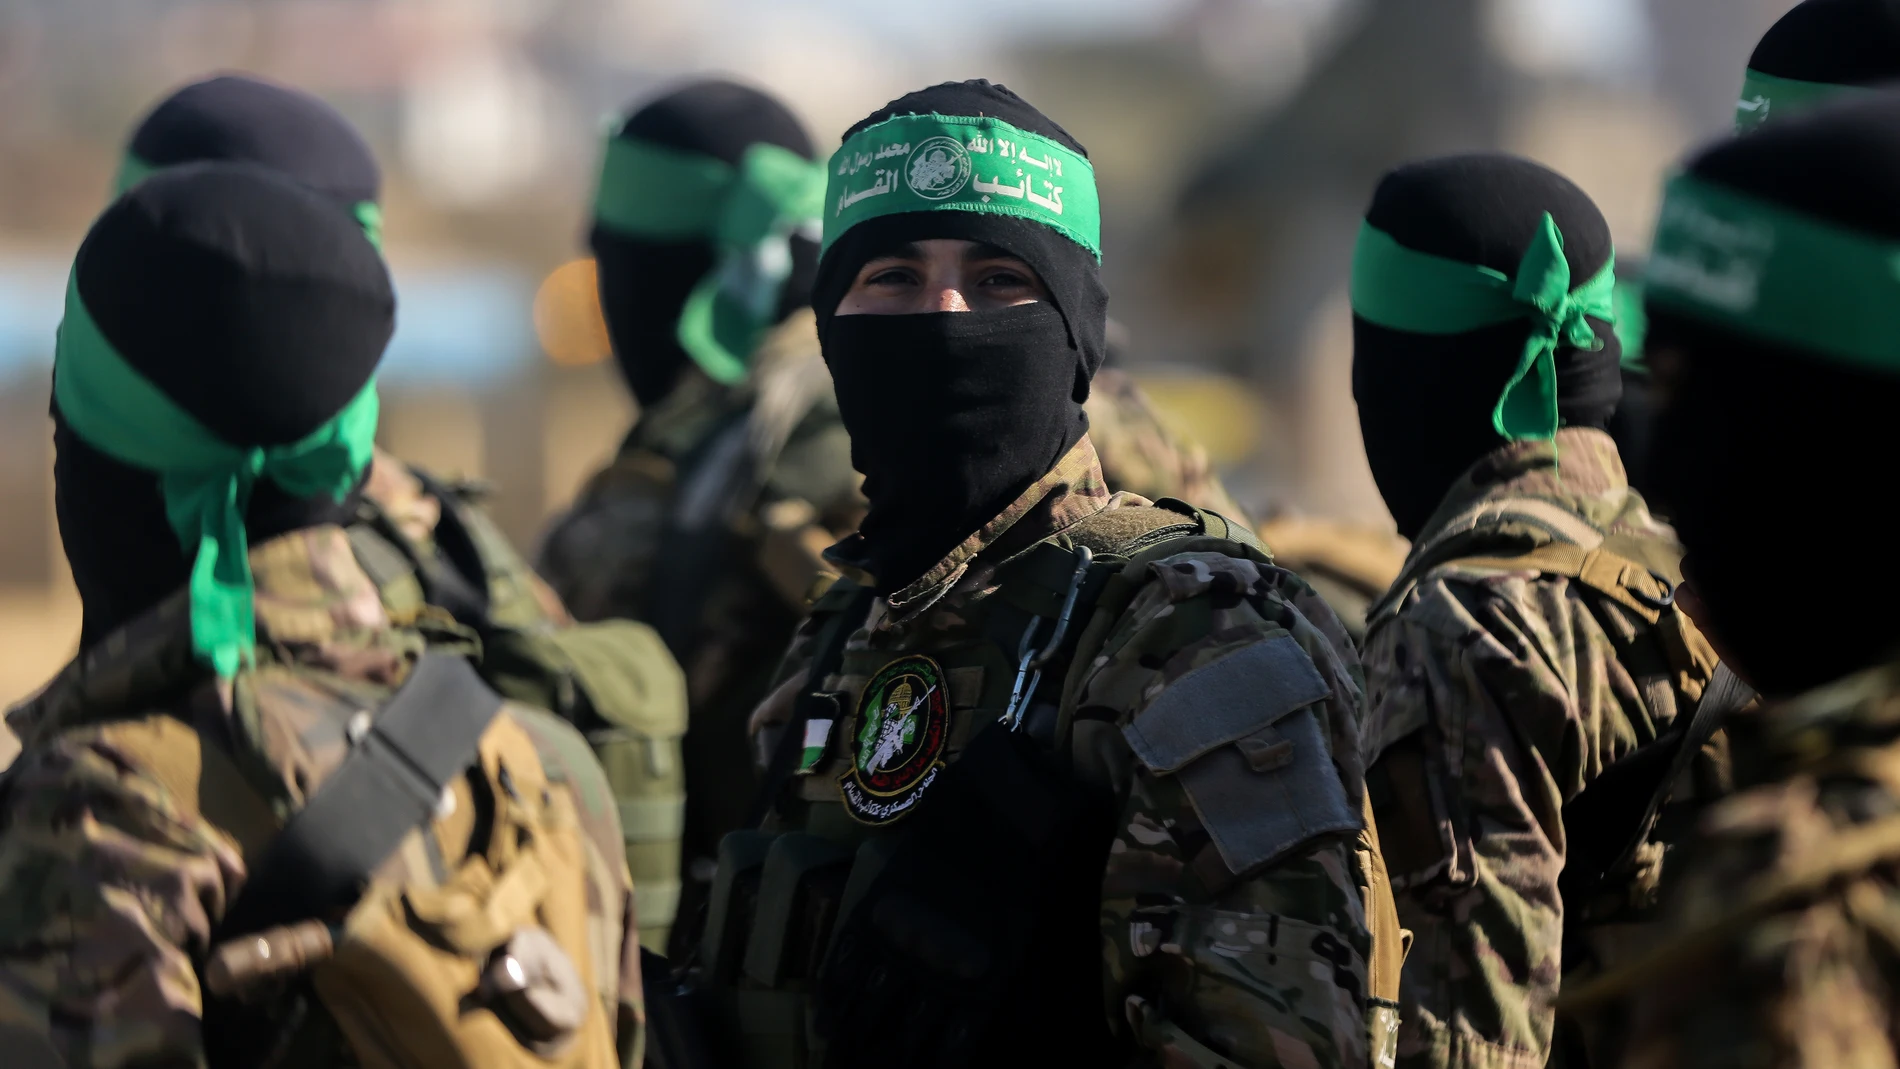 July 20, 2022, Gaza City, Gaza Strip, Palestine: Gaza, Palestine. 20 July 2022. The Izz ad-Din Al-Qassam Brigades, the military wing of the Palestinian Islamic resistance movement of Hamas, hold a military march at the Gaza port in Gaza City. The march falls on the anniversary of the capture of Israeli soldier Aron Shaul by Al Qassam Brigades during the 2014 Israeli war on Gaza (Foto de ARCHIVO) 20/07/2022